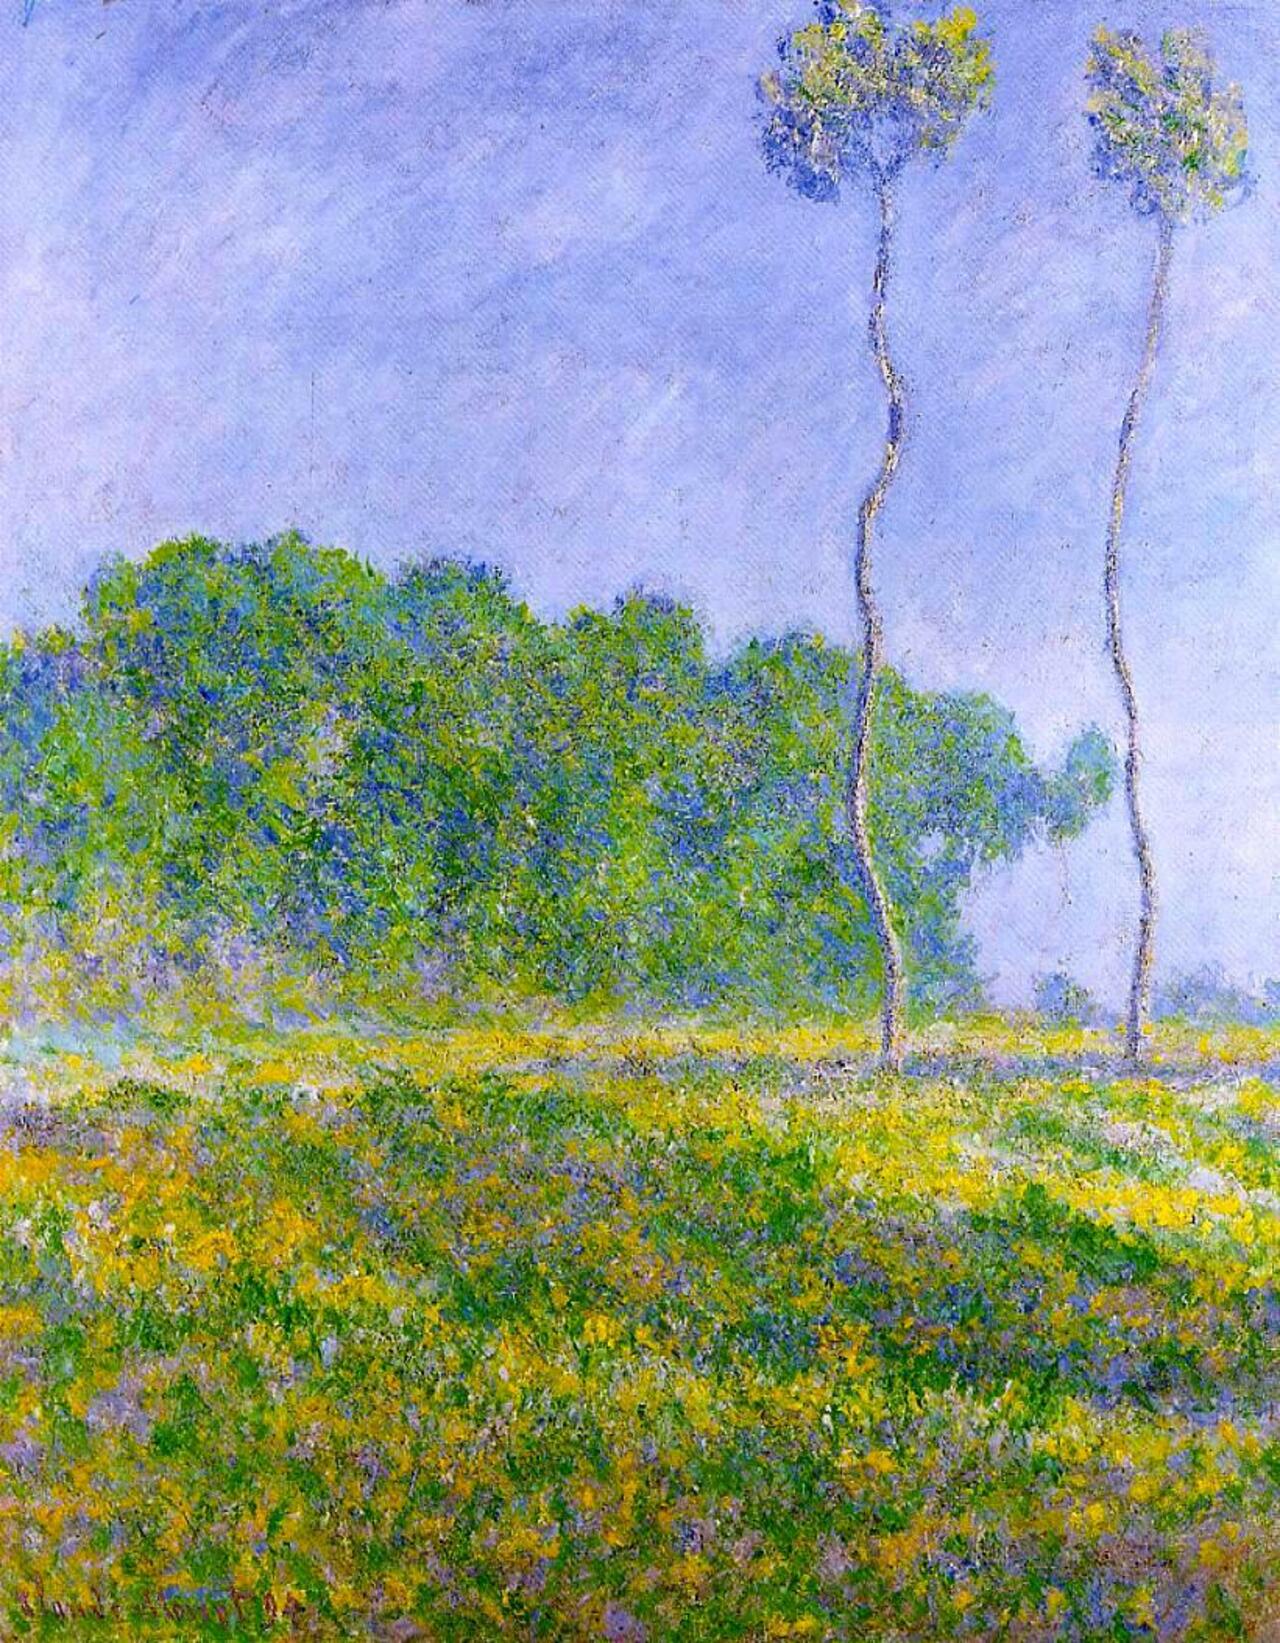 Check out Claude Monet's bright 'Spring Landscape' created in 1894 http://t.co/K7VpLxFjLh